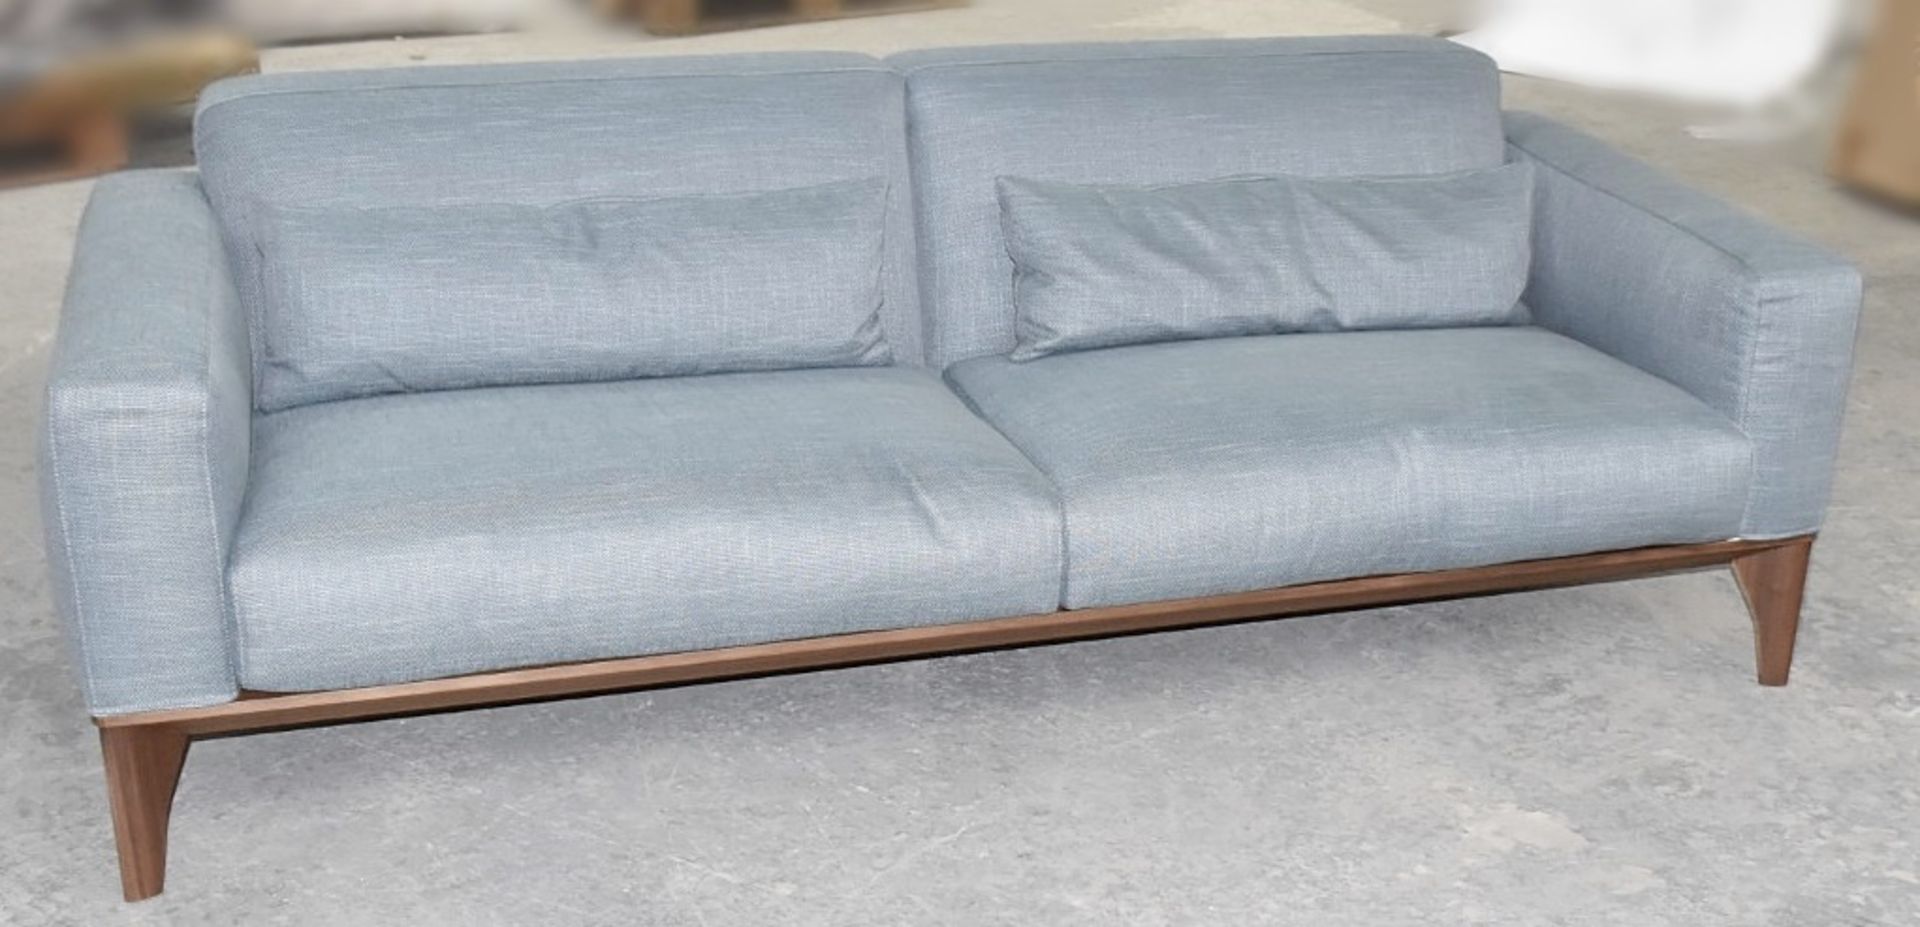 1 x PORADA 'Fellow' Designer Upholstered 2.2-Metre Sofa with a Canaletto Walnut Frame - RRP £7,450 - Image 2 of 12